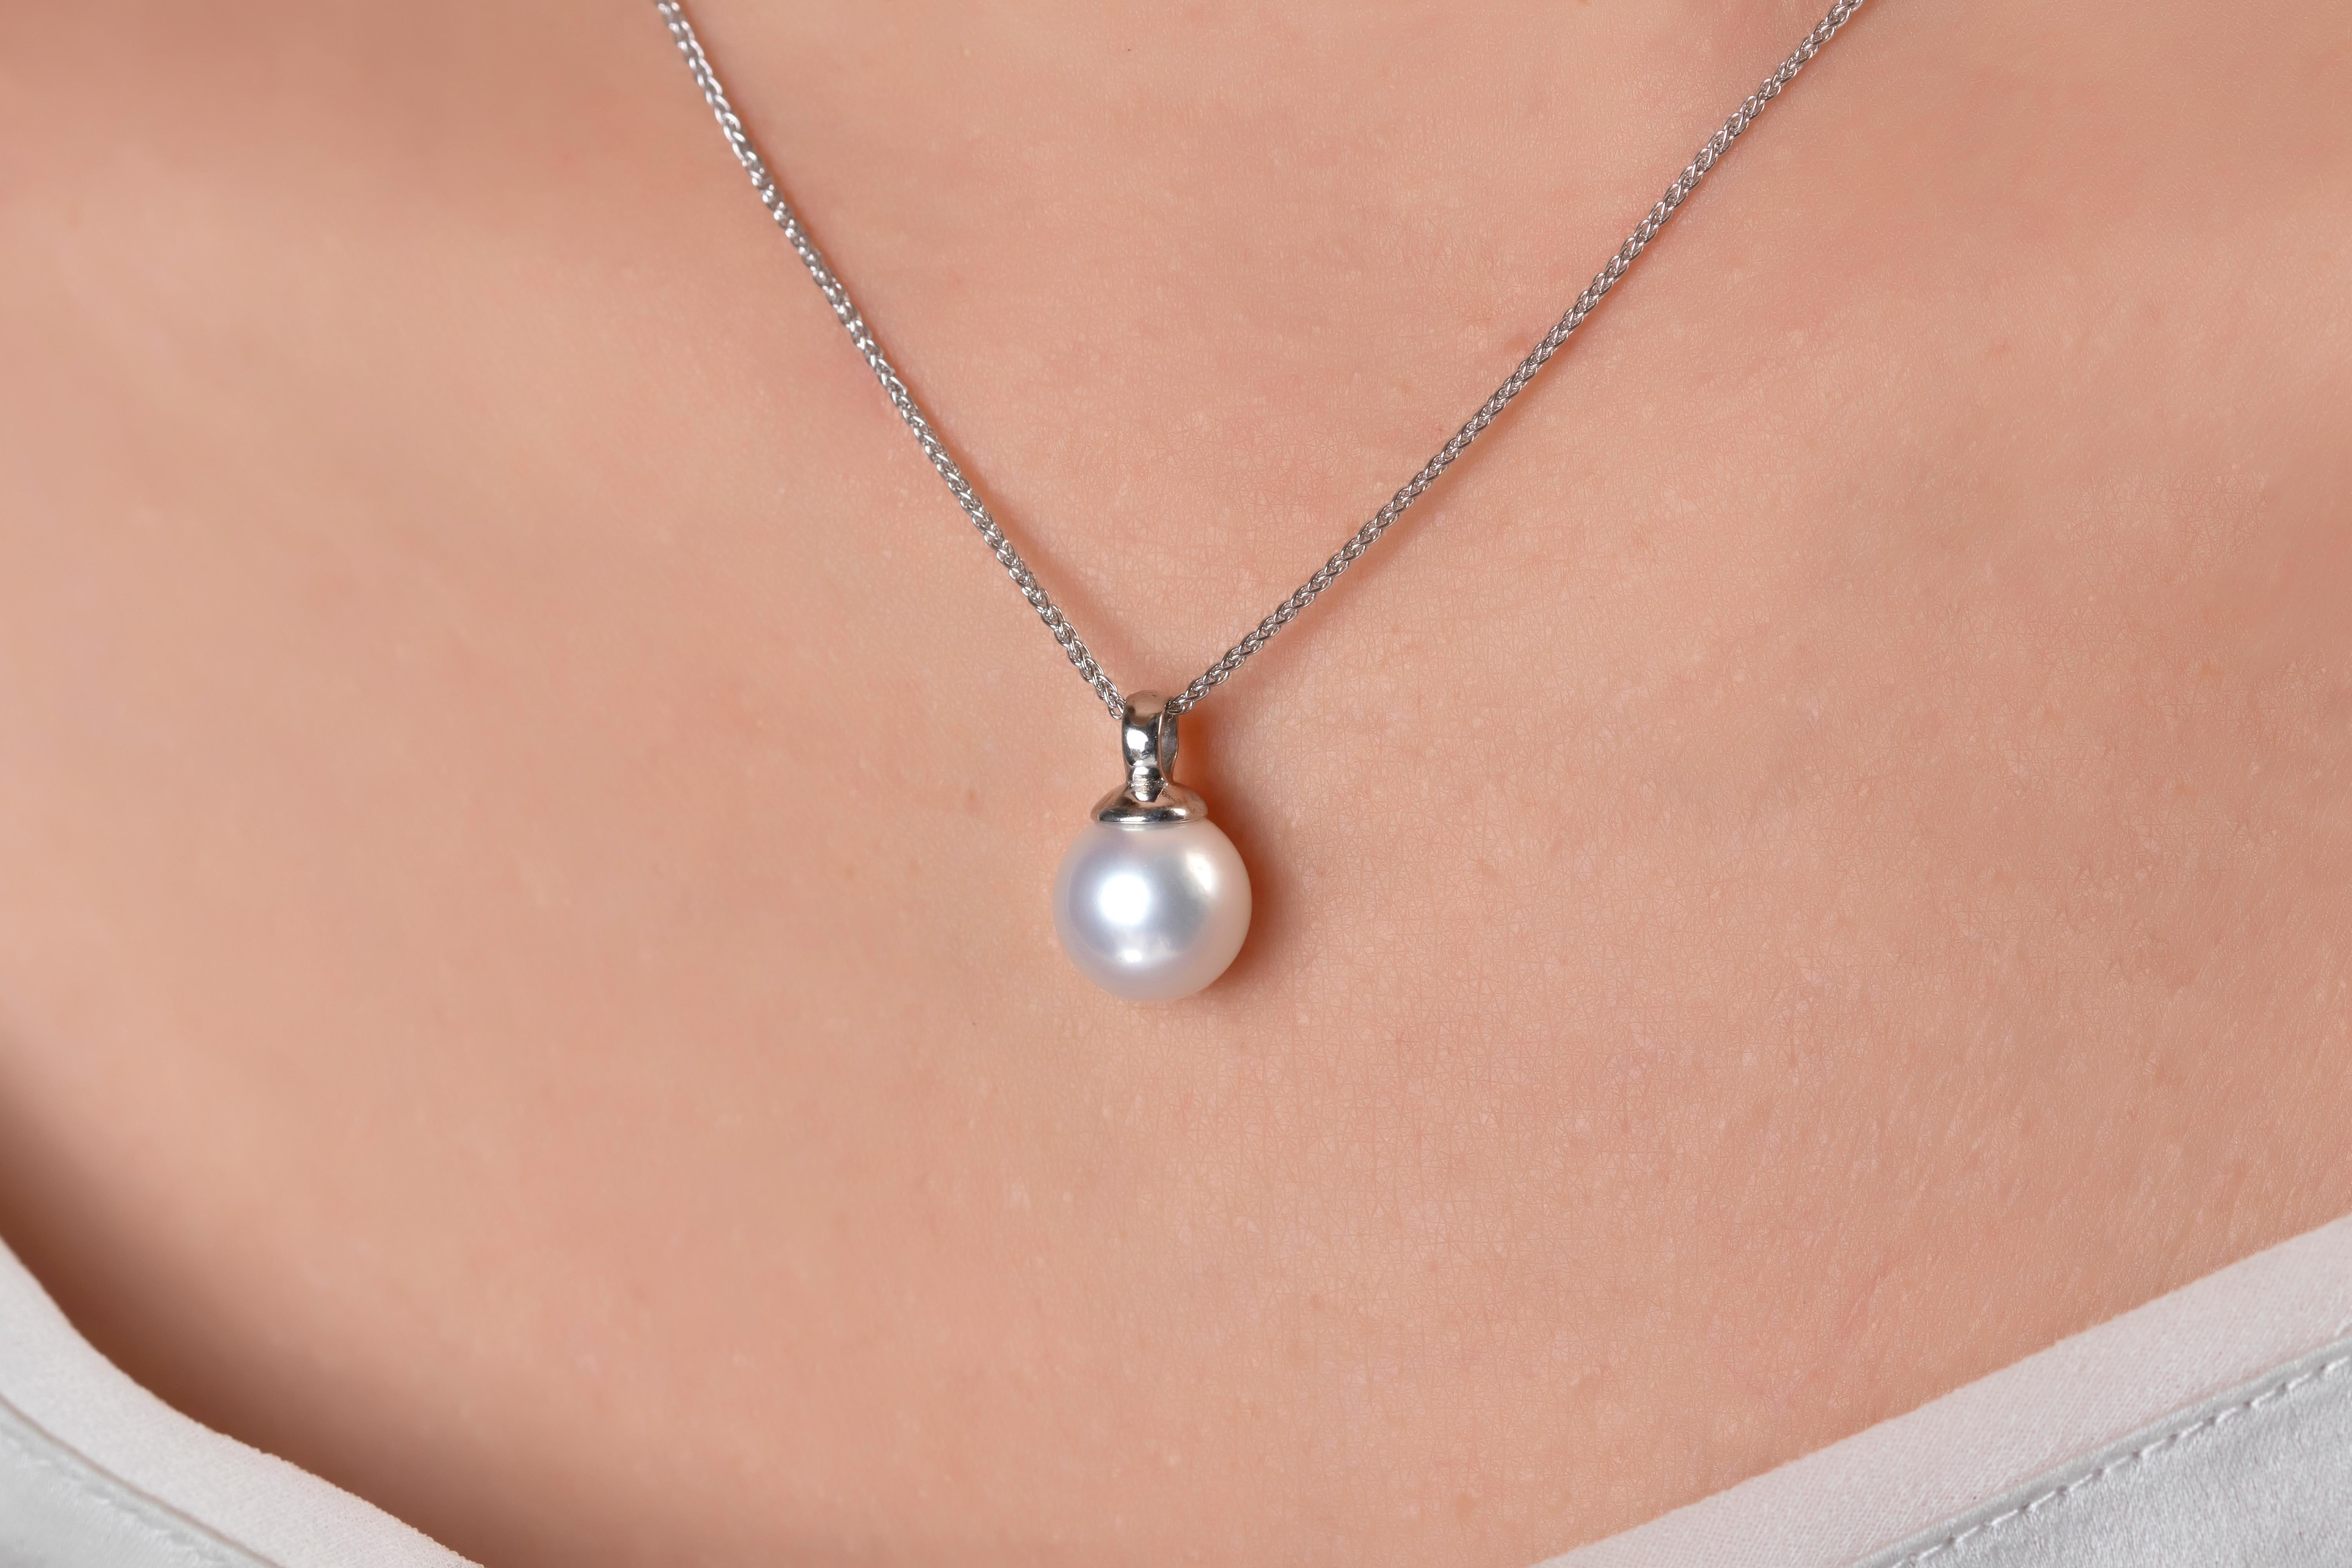 This timeless pendant by Yoko London features a high quality 9.5-10mm Australian South Sea pearl in a simple 18 Karat white gold setting. The understated setting allows the superb lustre of the South Sea pearl to do all the talking. The perfect